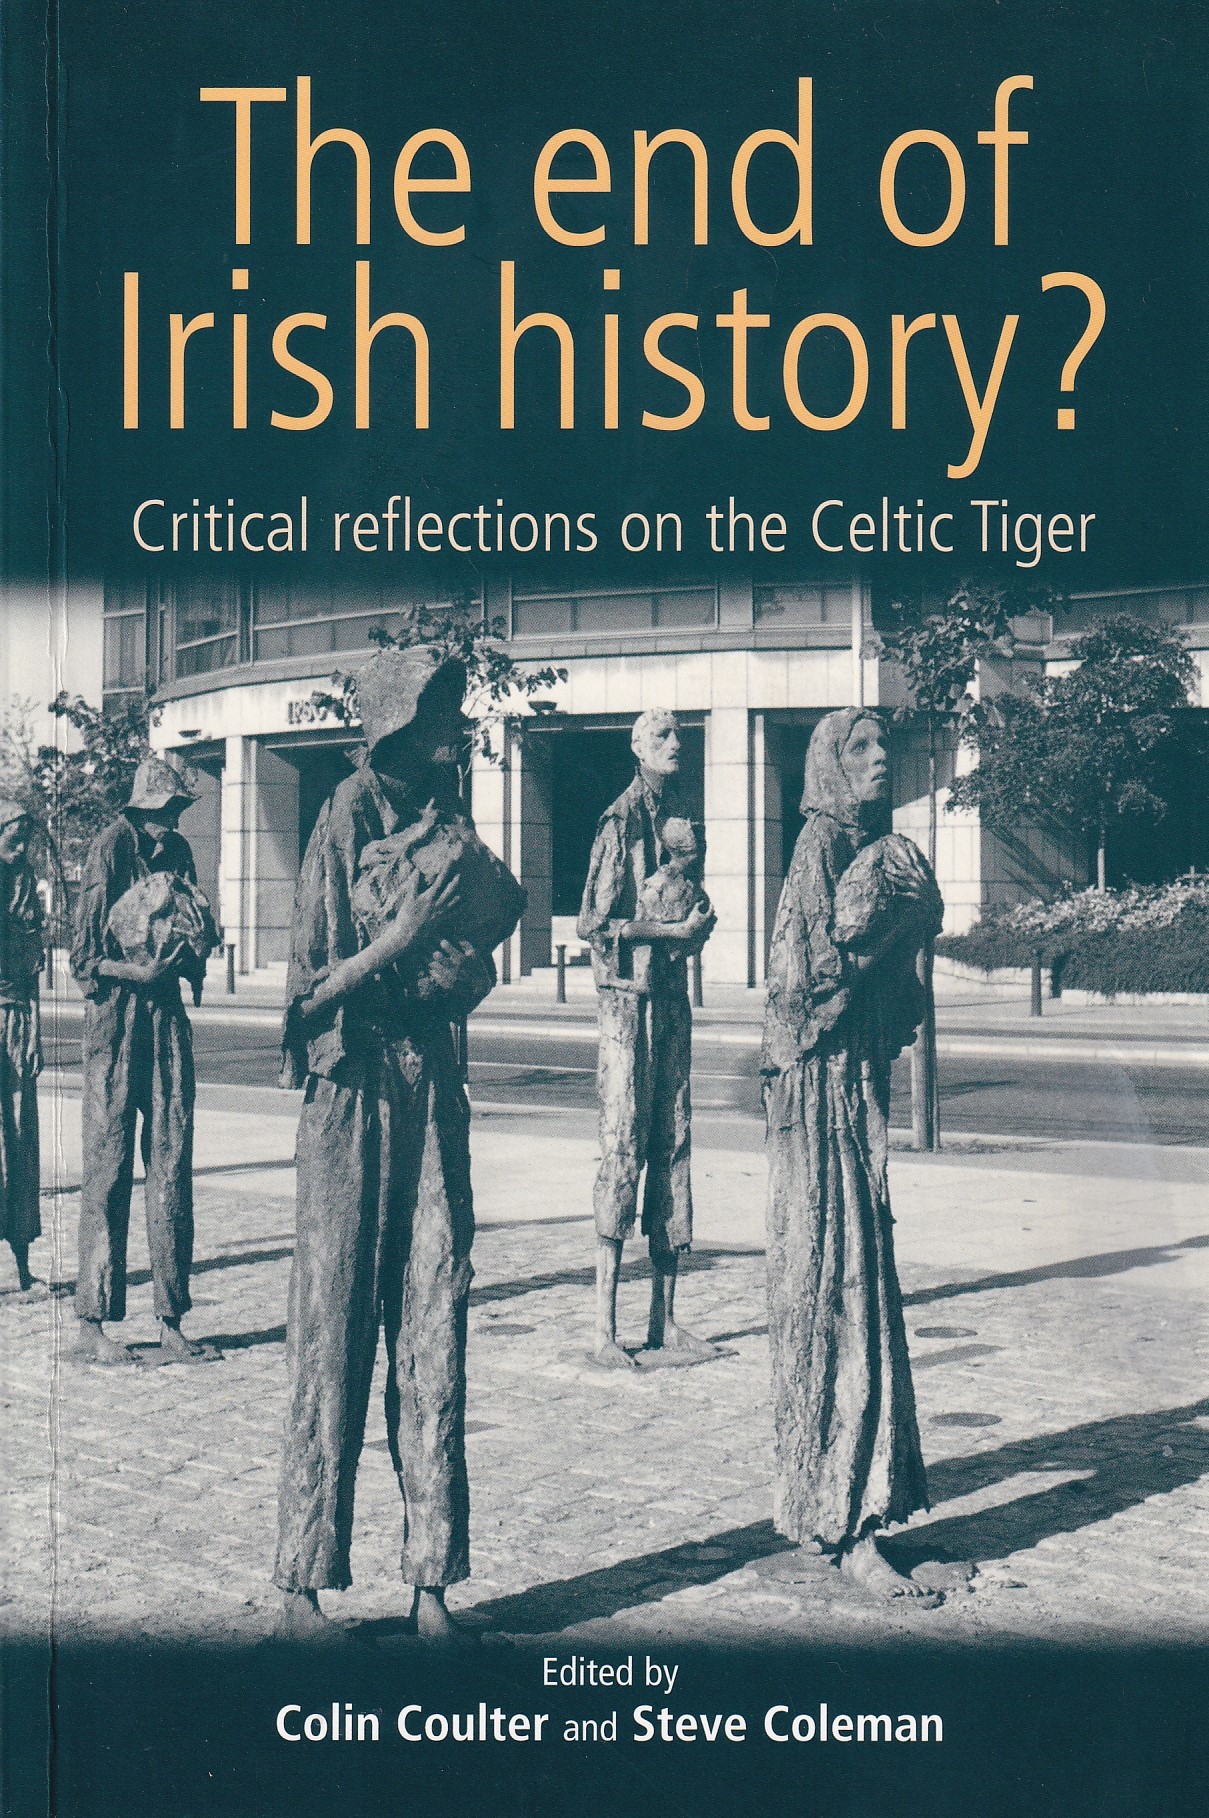 The End of Irish History? Critical Reflections on the Celtic Tiger by Colin Coulter & Steve Coleman (eds.)